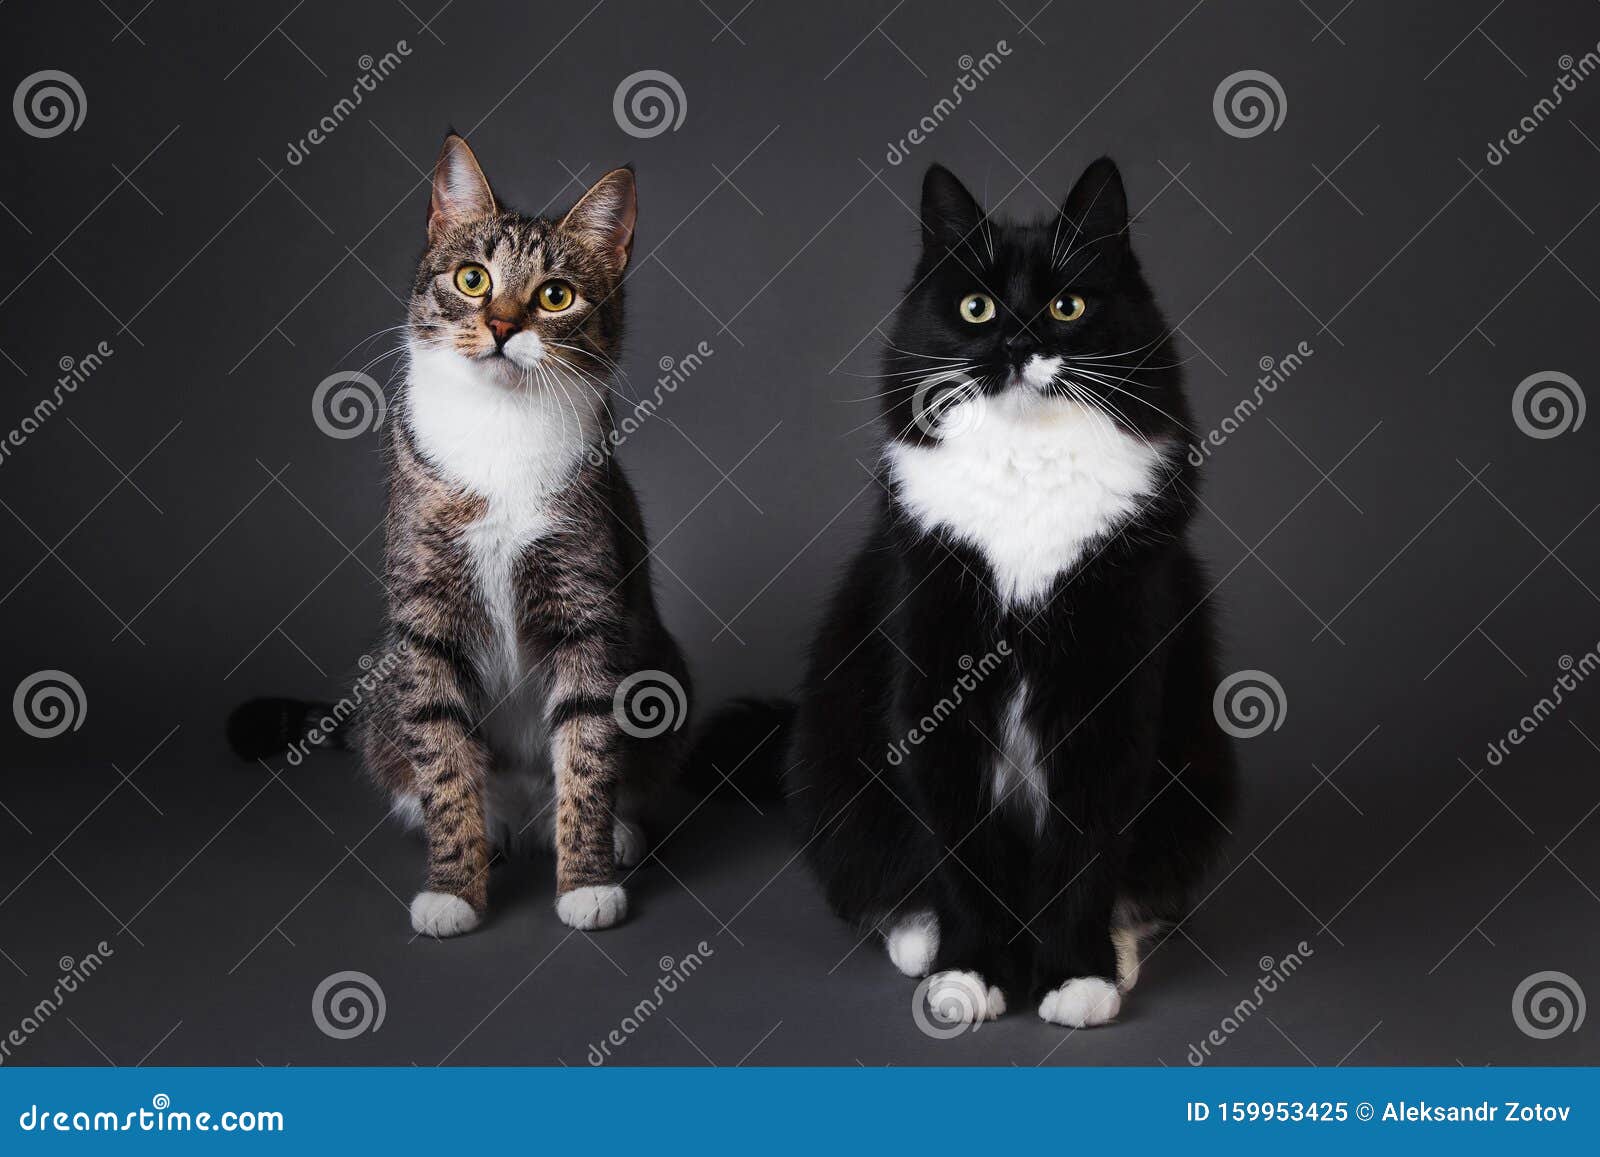 portrait of two cute kittens a black kitten and gray stripped on grey background in studio